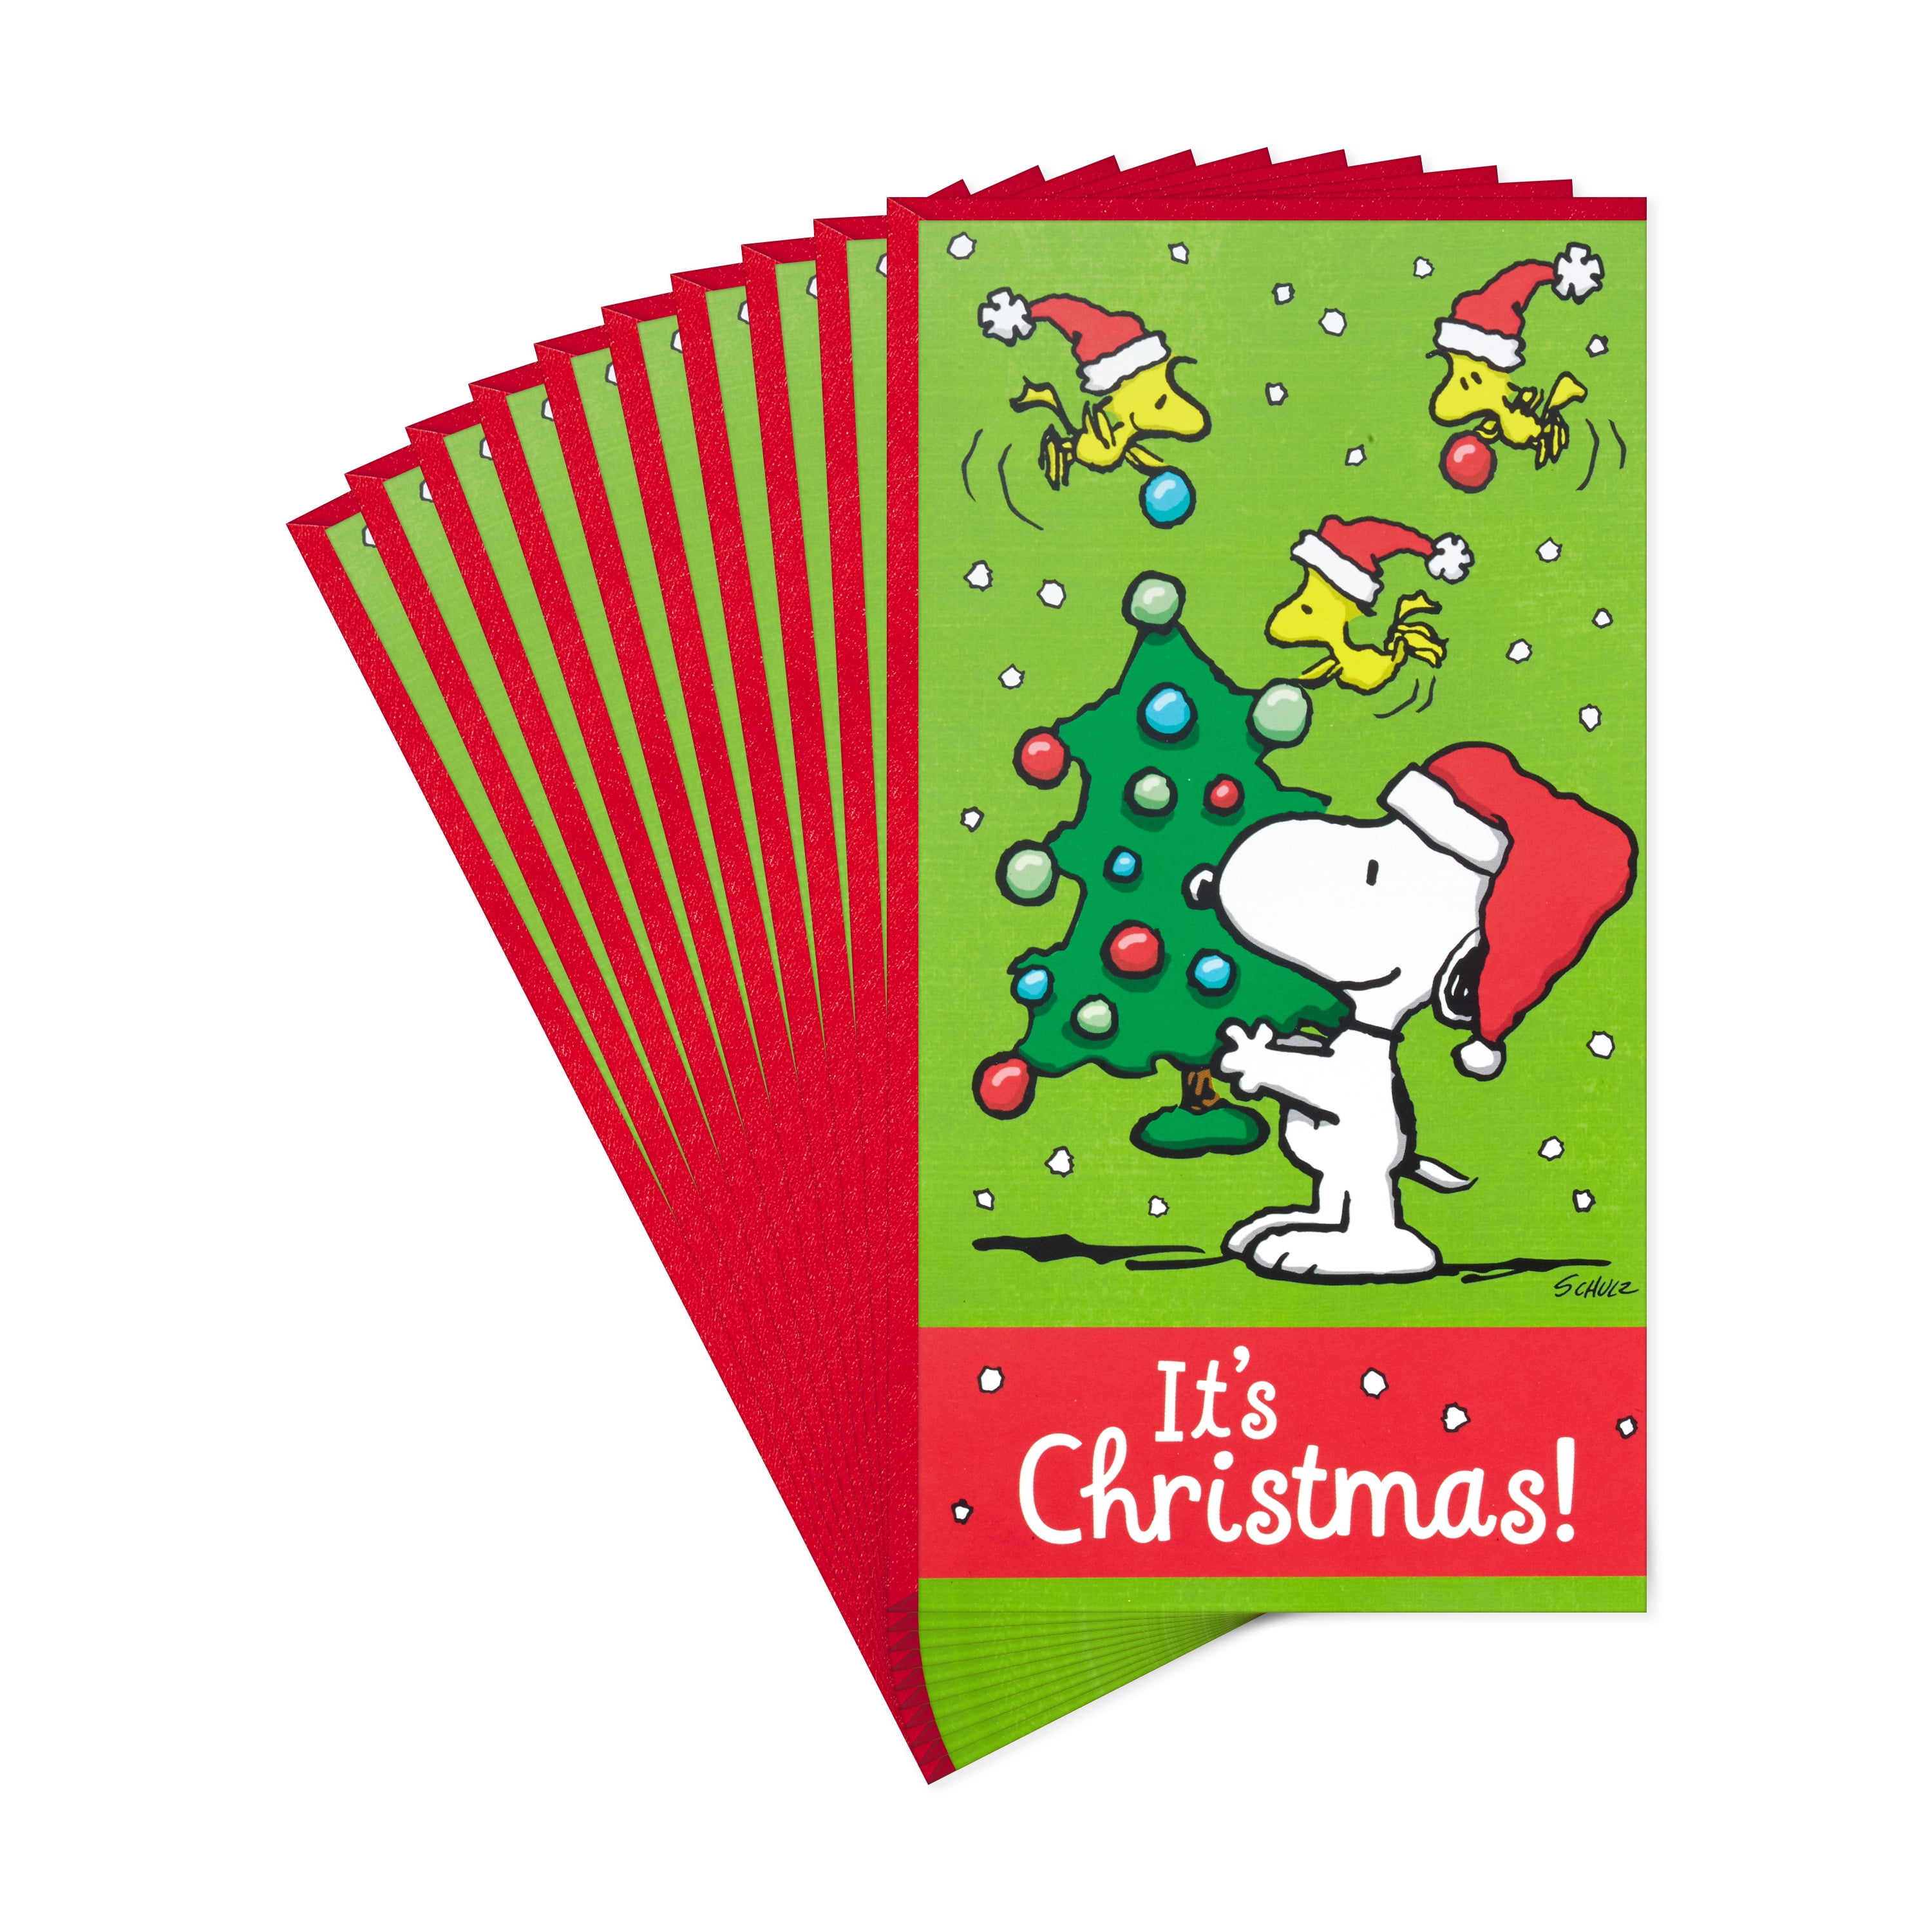 Kids Kraft Ossian Pack of 4 Xmas Money Gift Wallets Colourful Cash Note Gift Voucher Card with Assorted Traditional Festive Christmas Designs Santa Elf Snow Snowman Tree Present Snowflake